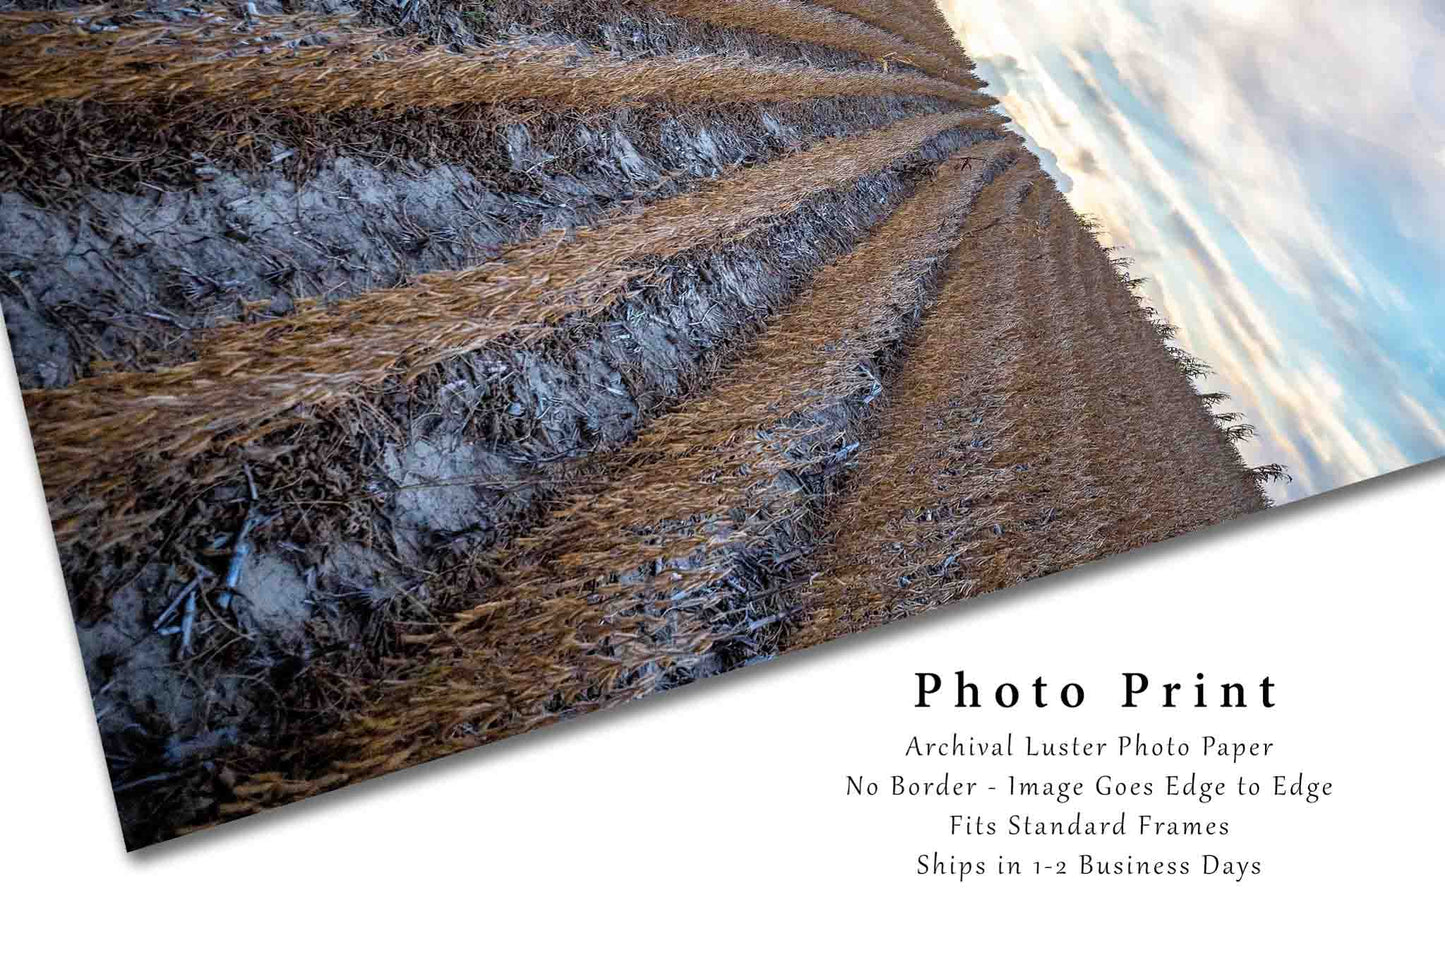 Farming Photography Print - Picture of Soybean Rows in Eastern Nebraska Field Farm Photo Country Home Decor 4x6 to 40x60